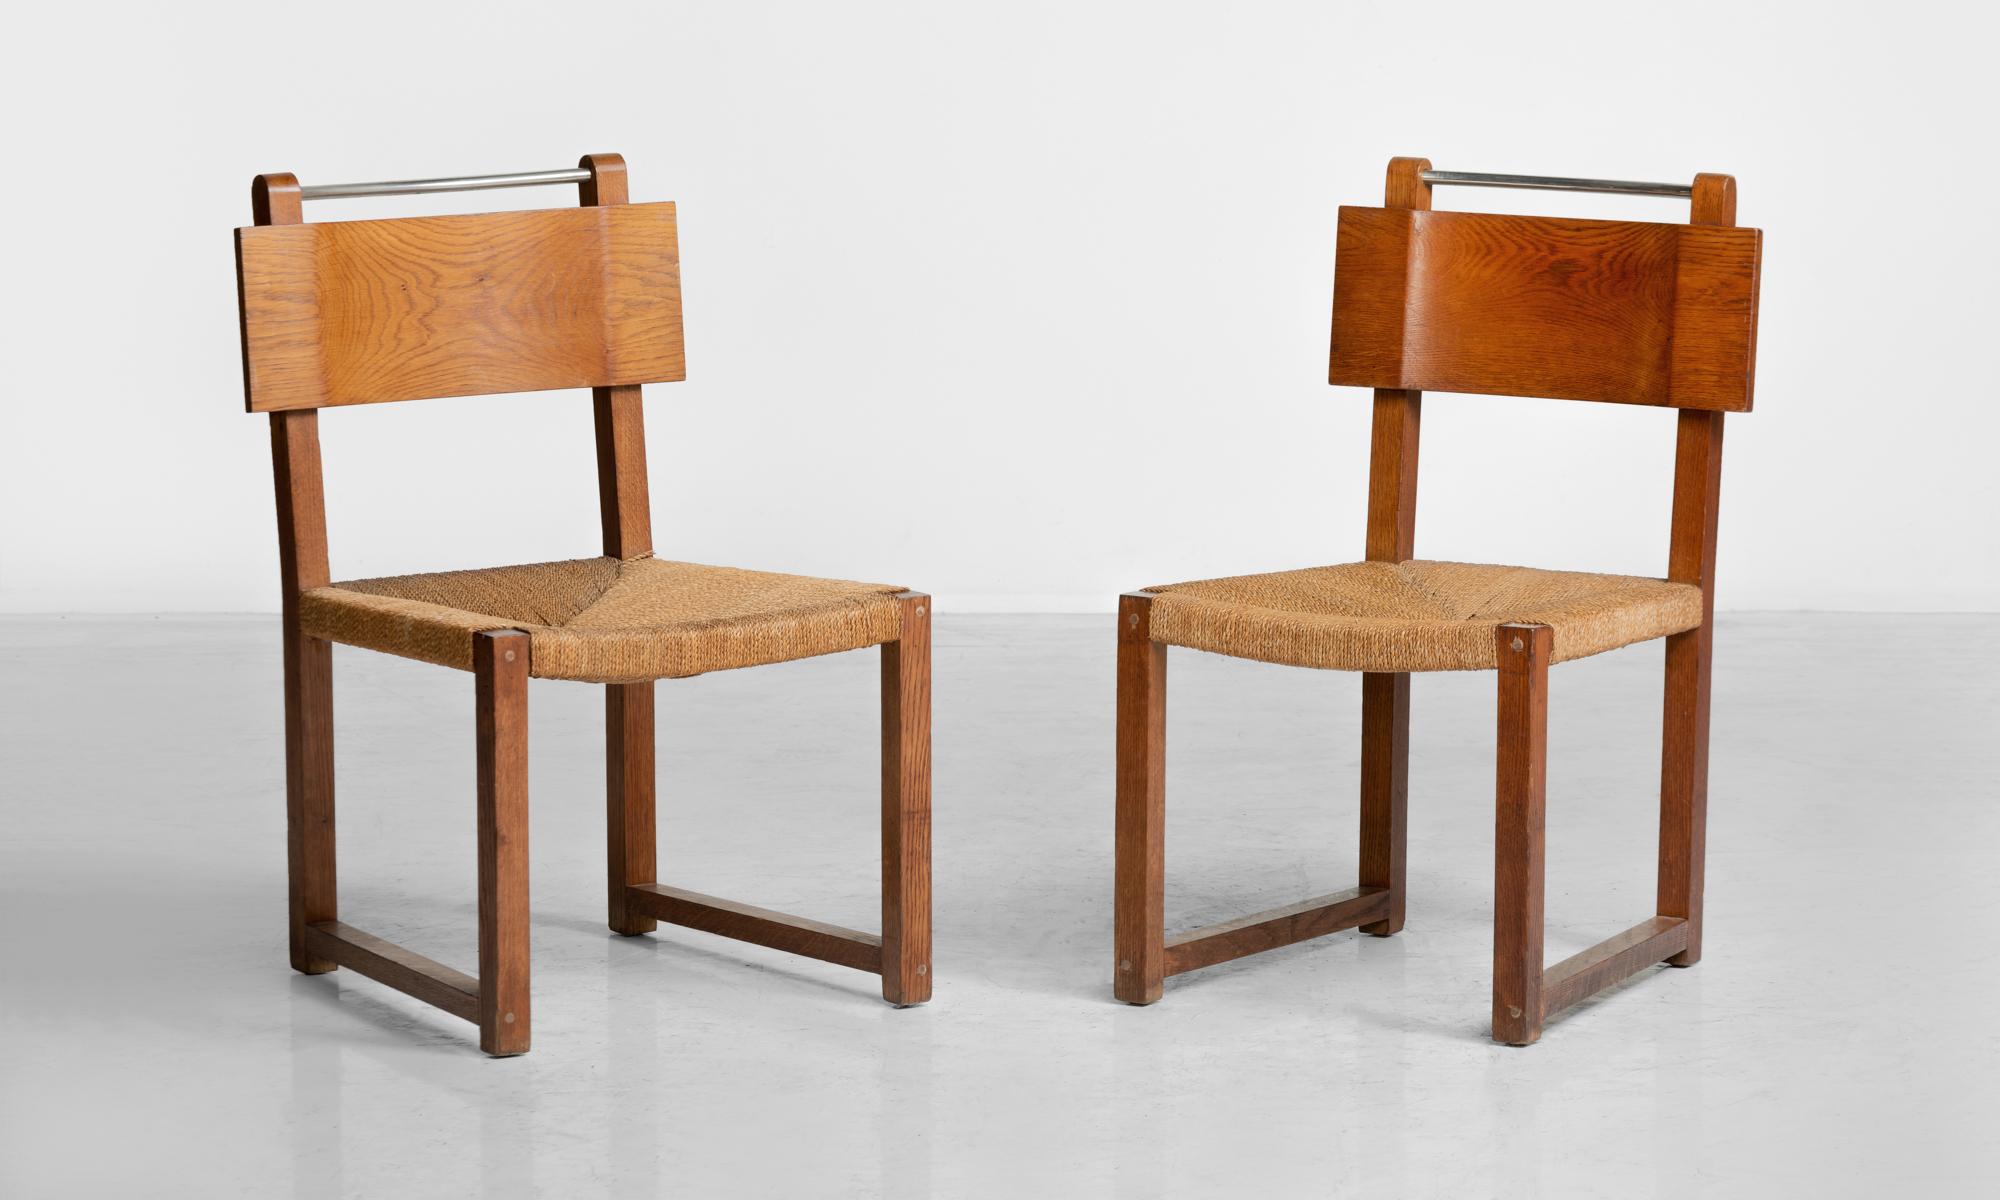 Modernist oak and rush side chairs, Czechoslovakia, circa 1930.

Concave oak table back and polished steel bar above a danish cord seat.
Measures: 19.5